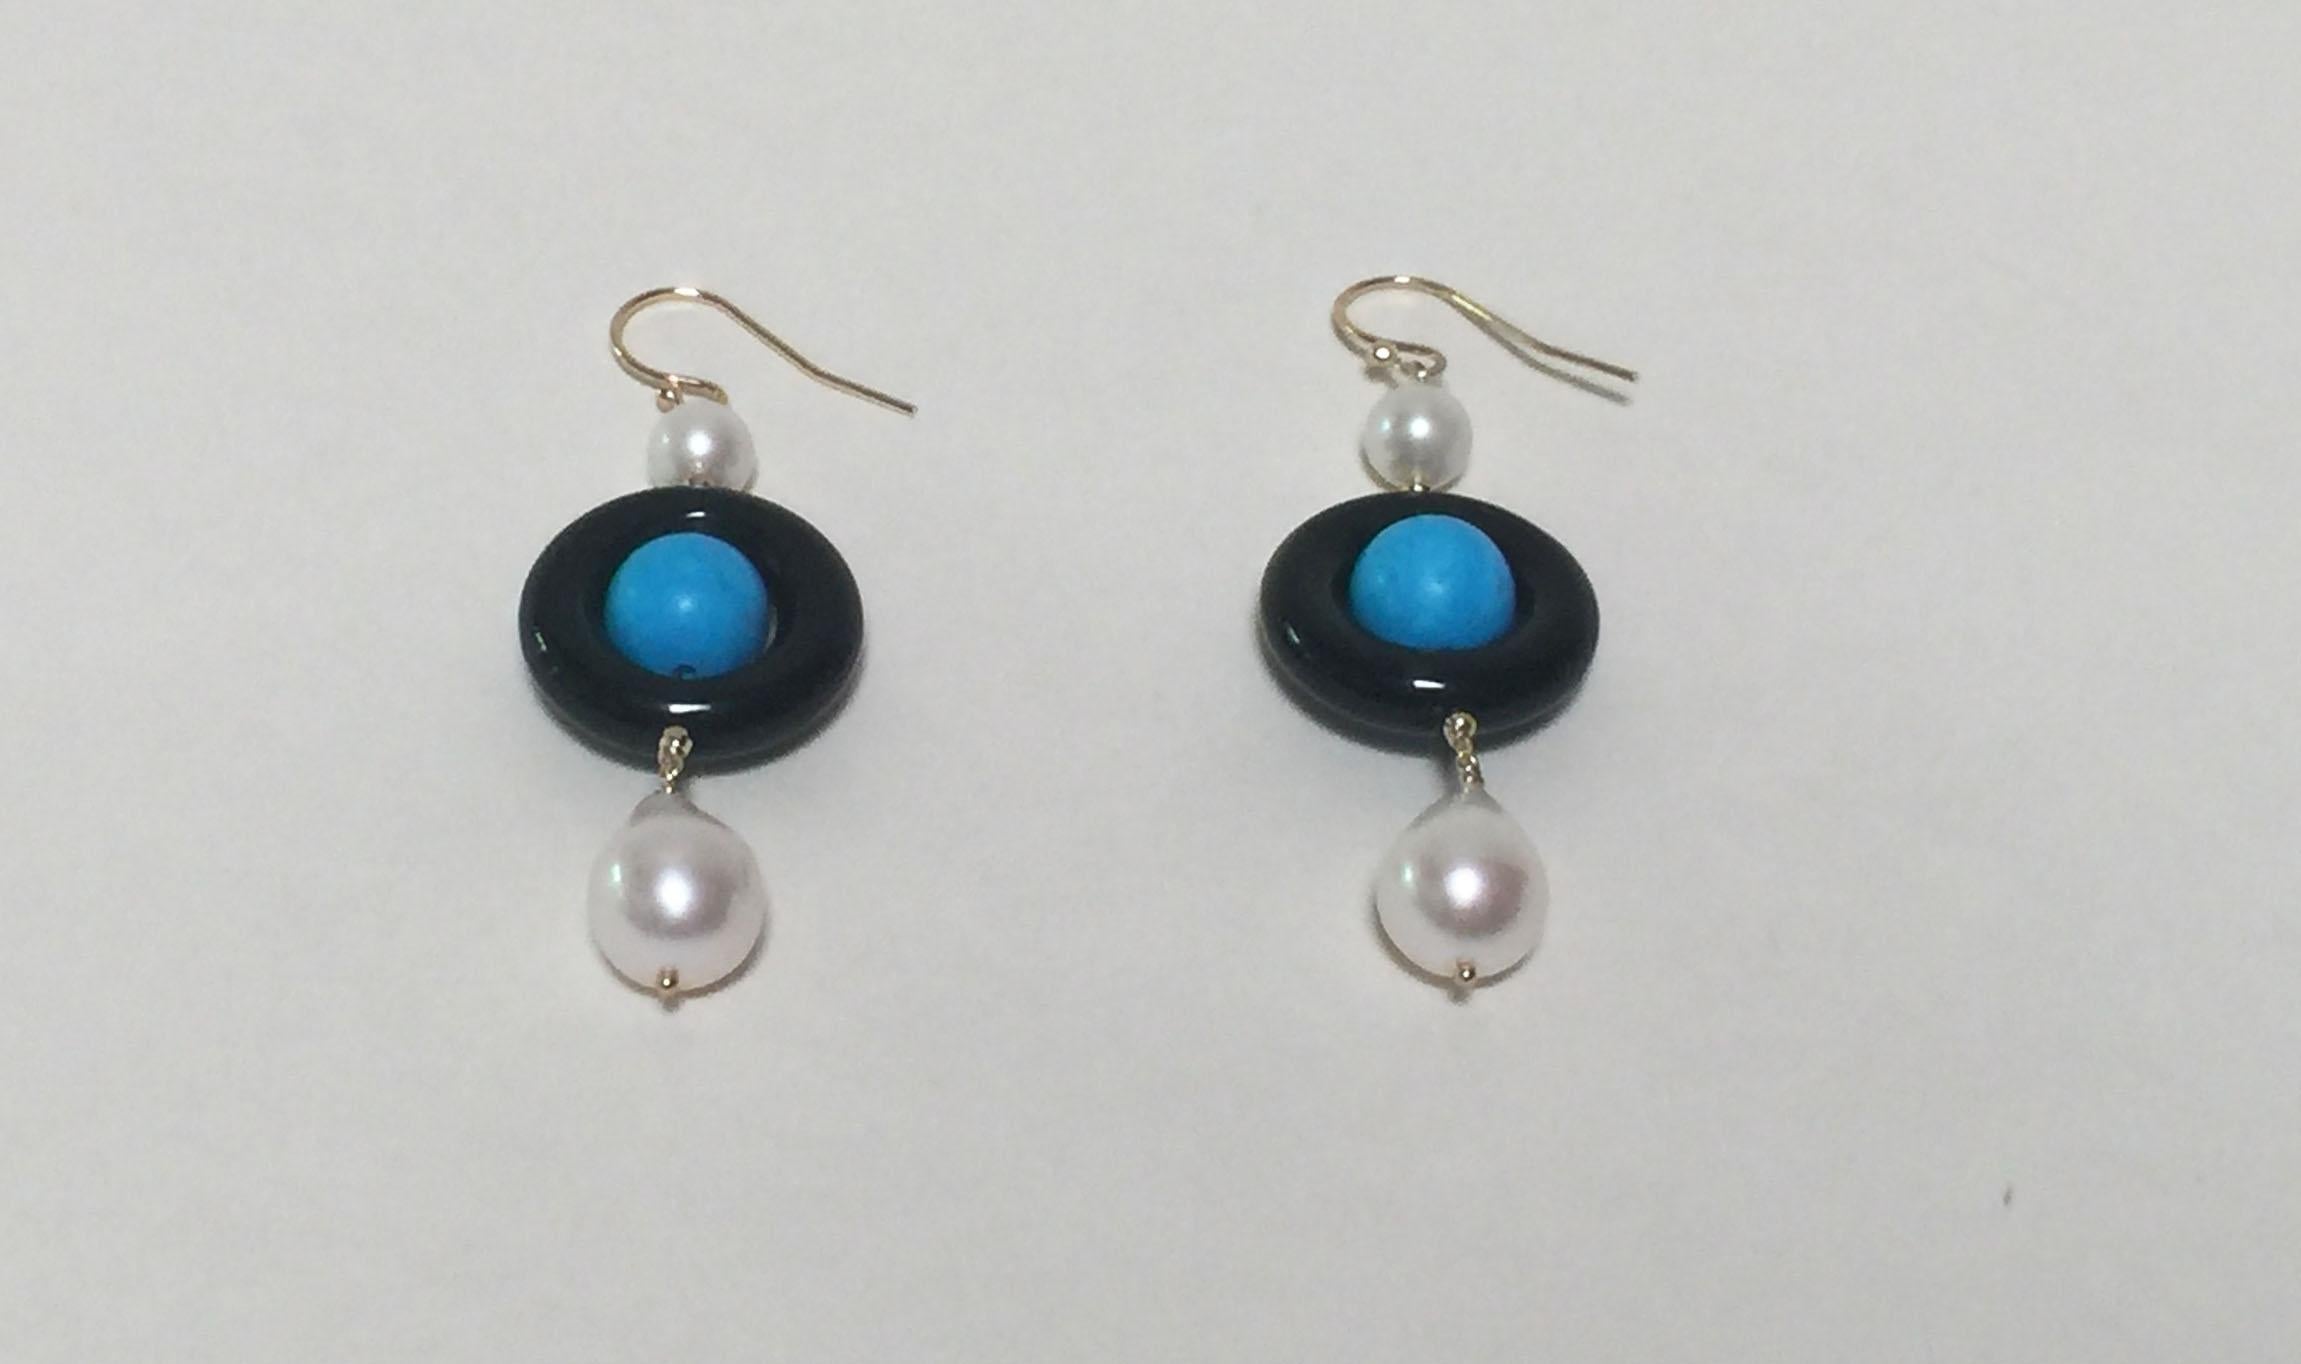 These elegant onyx, pearl and turquoise earrings are highlighted with 14k yellow gold beads and wiring. The center bright blue turquoise bead is outlined by a circular black onyx bead. A small glowing white round pearl hangs above the onyx bead,